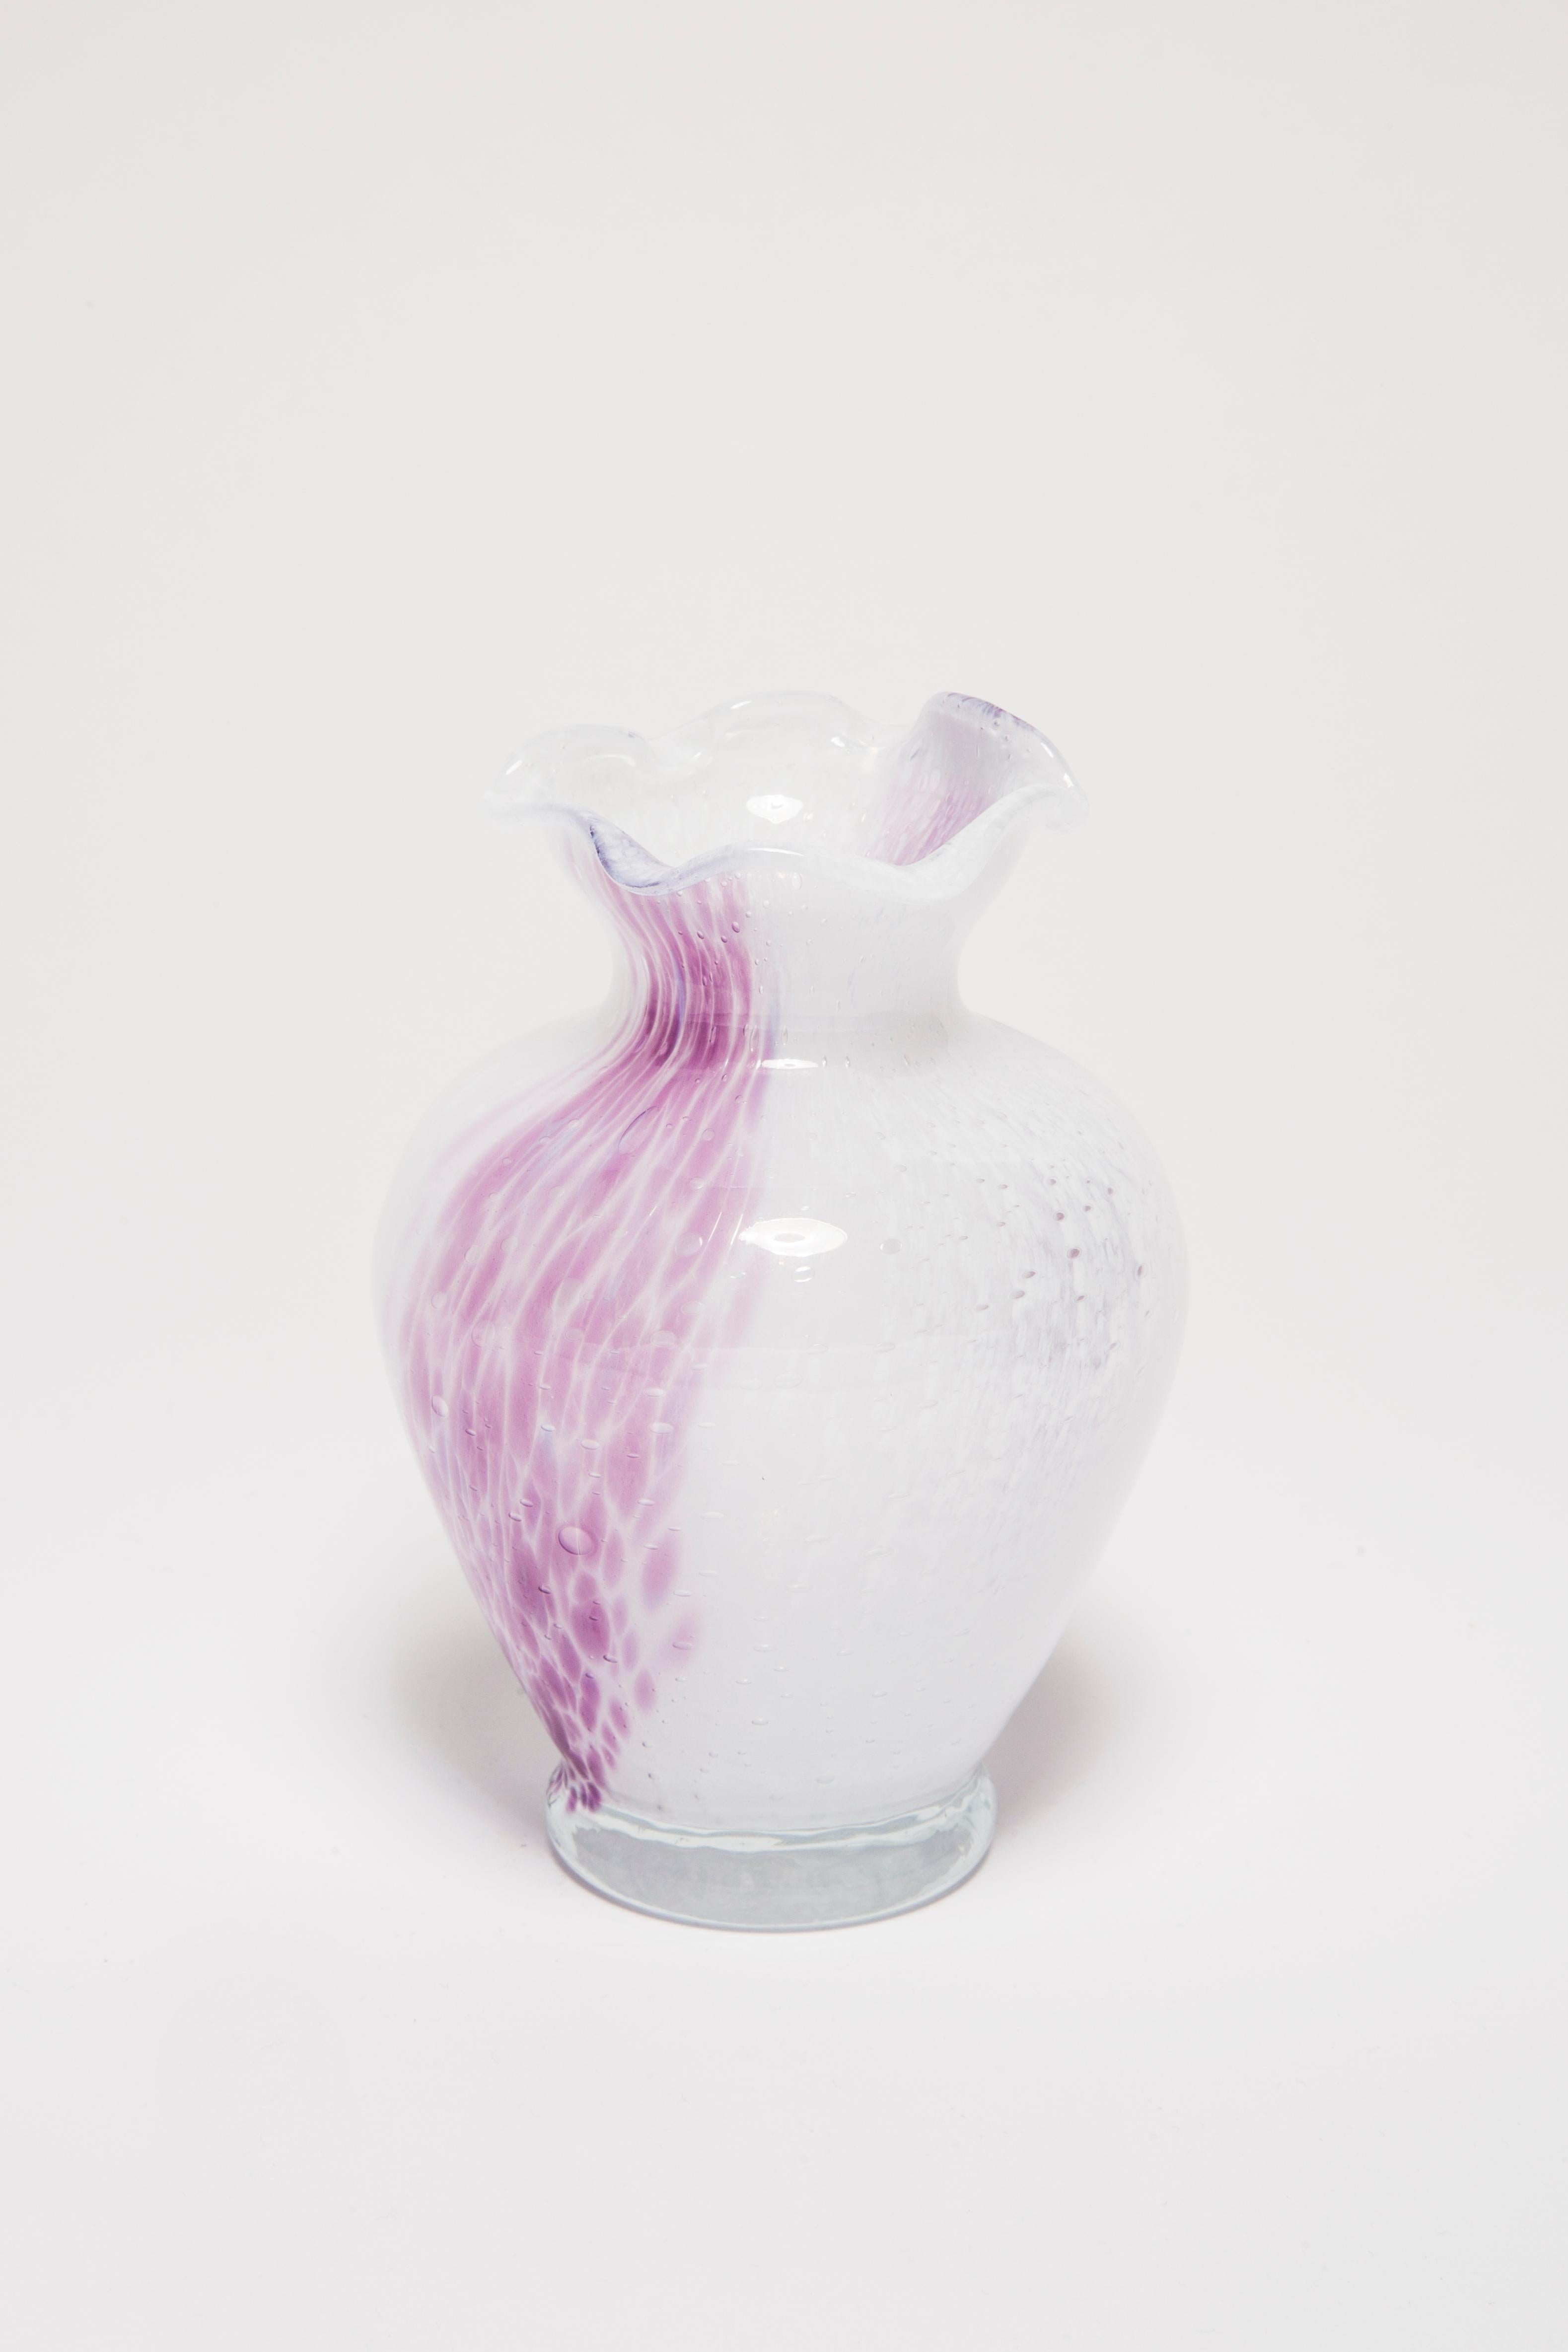 Mid Century Vintage White and Purple Small Murano Vase, Italy, 1960s For Sale 2